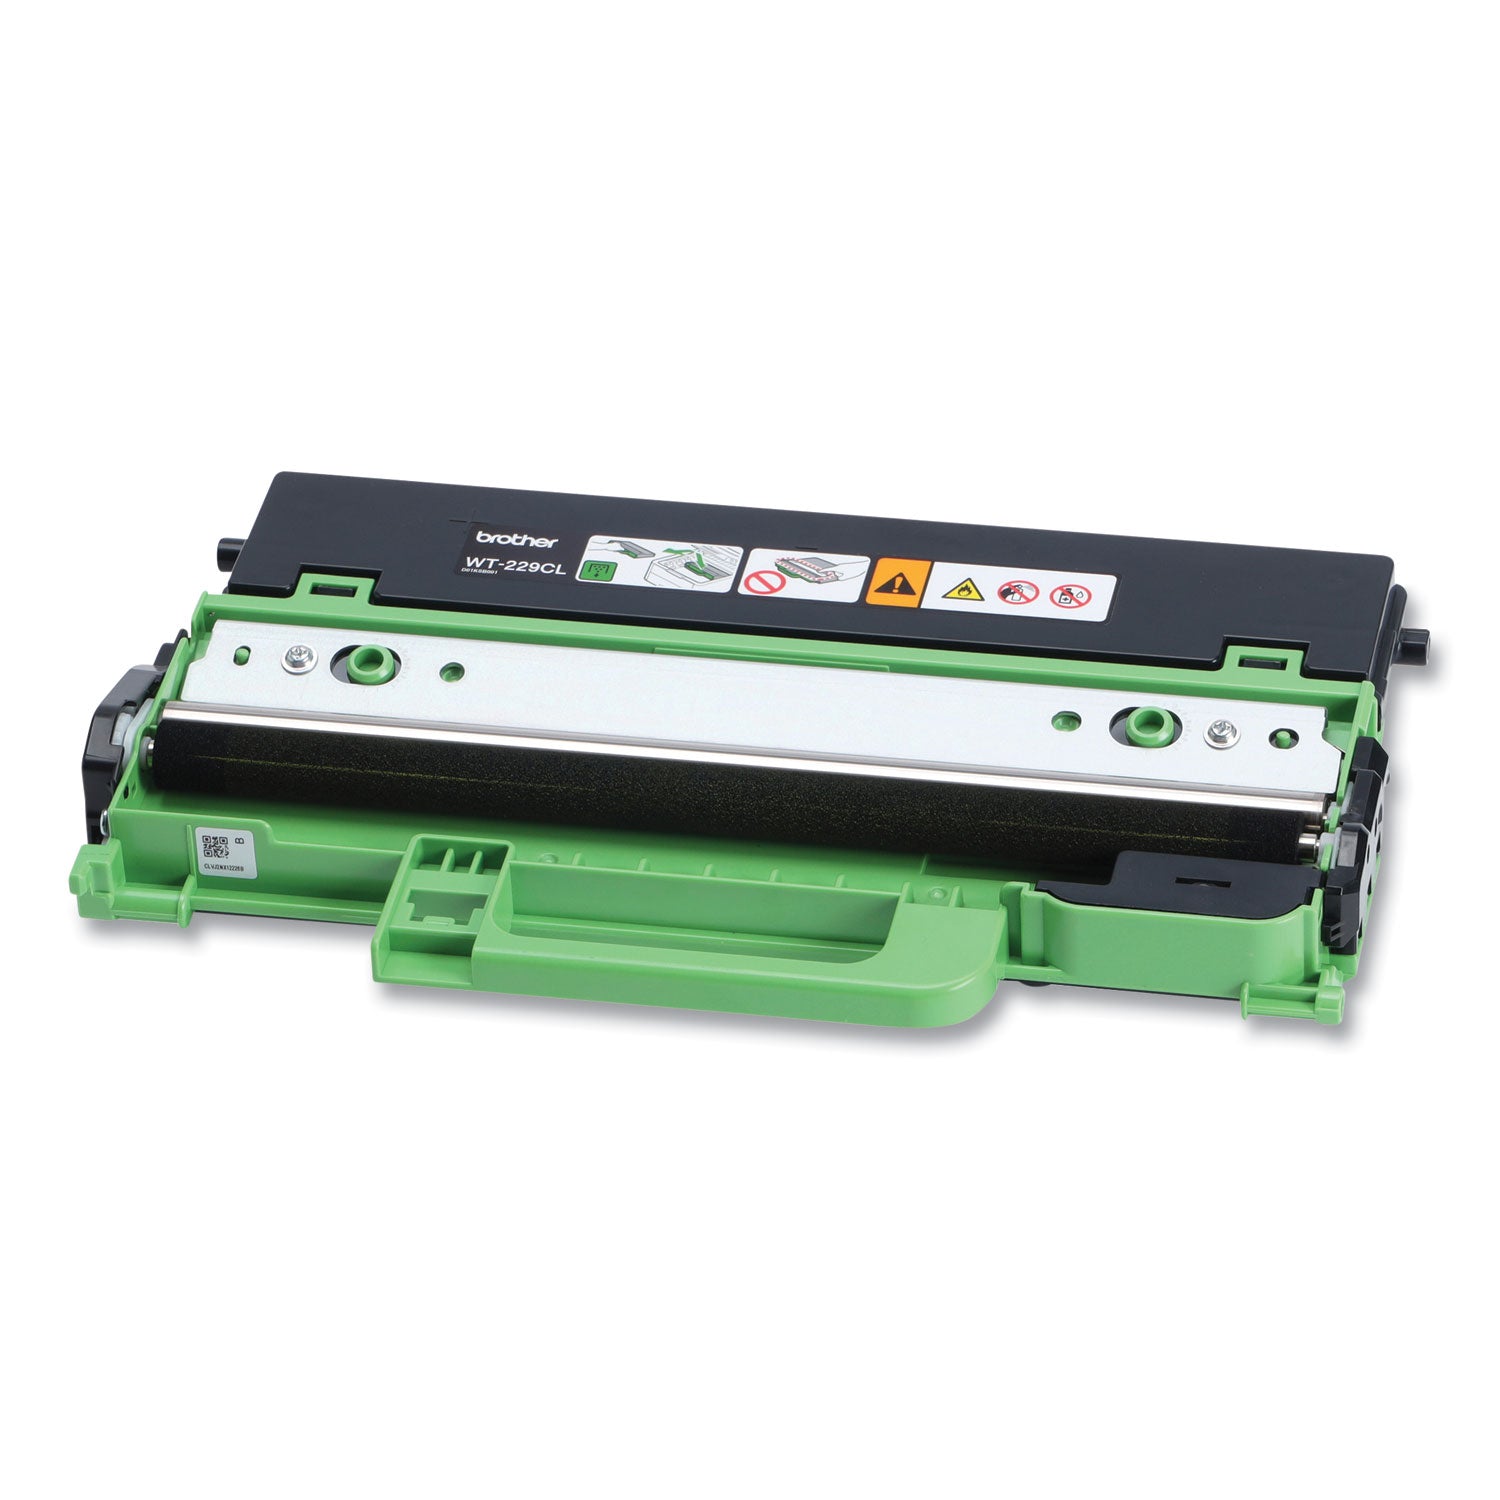 wt229cl-waste-toner-box-50000-page-yield_brtwt229cl - 3